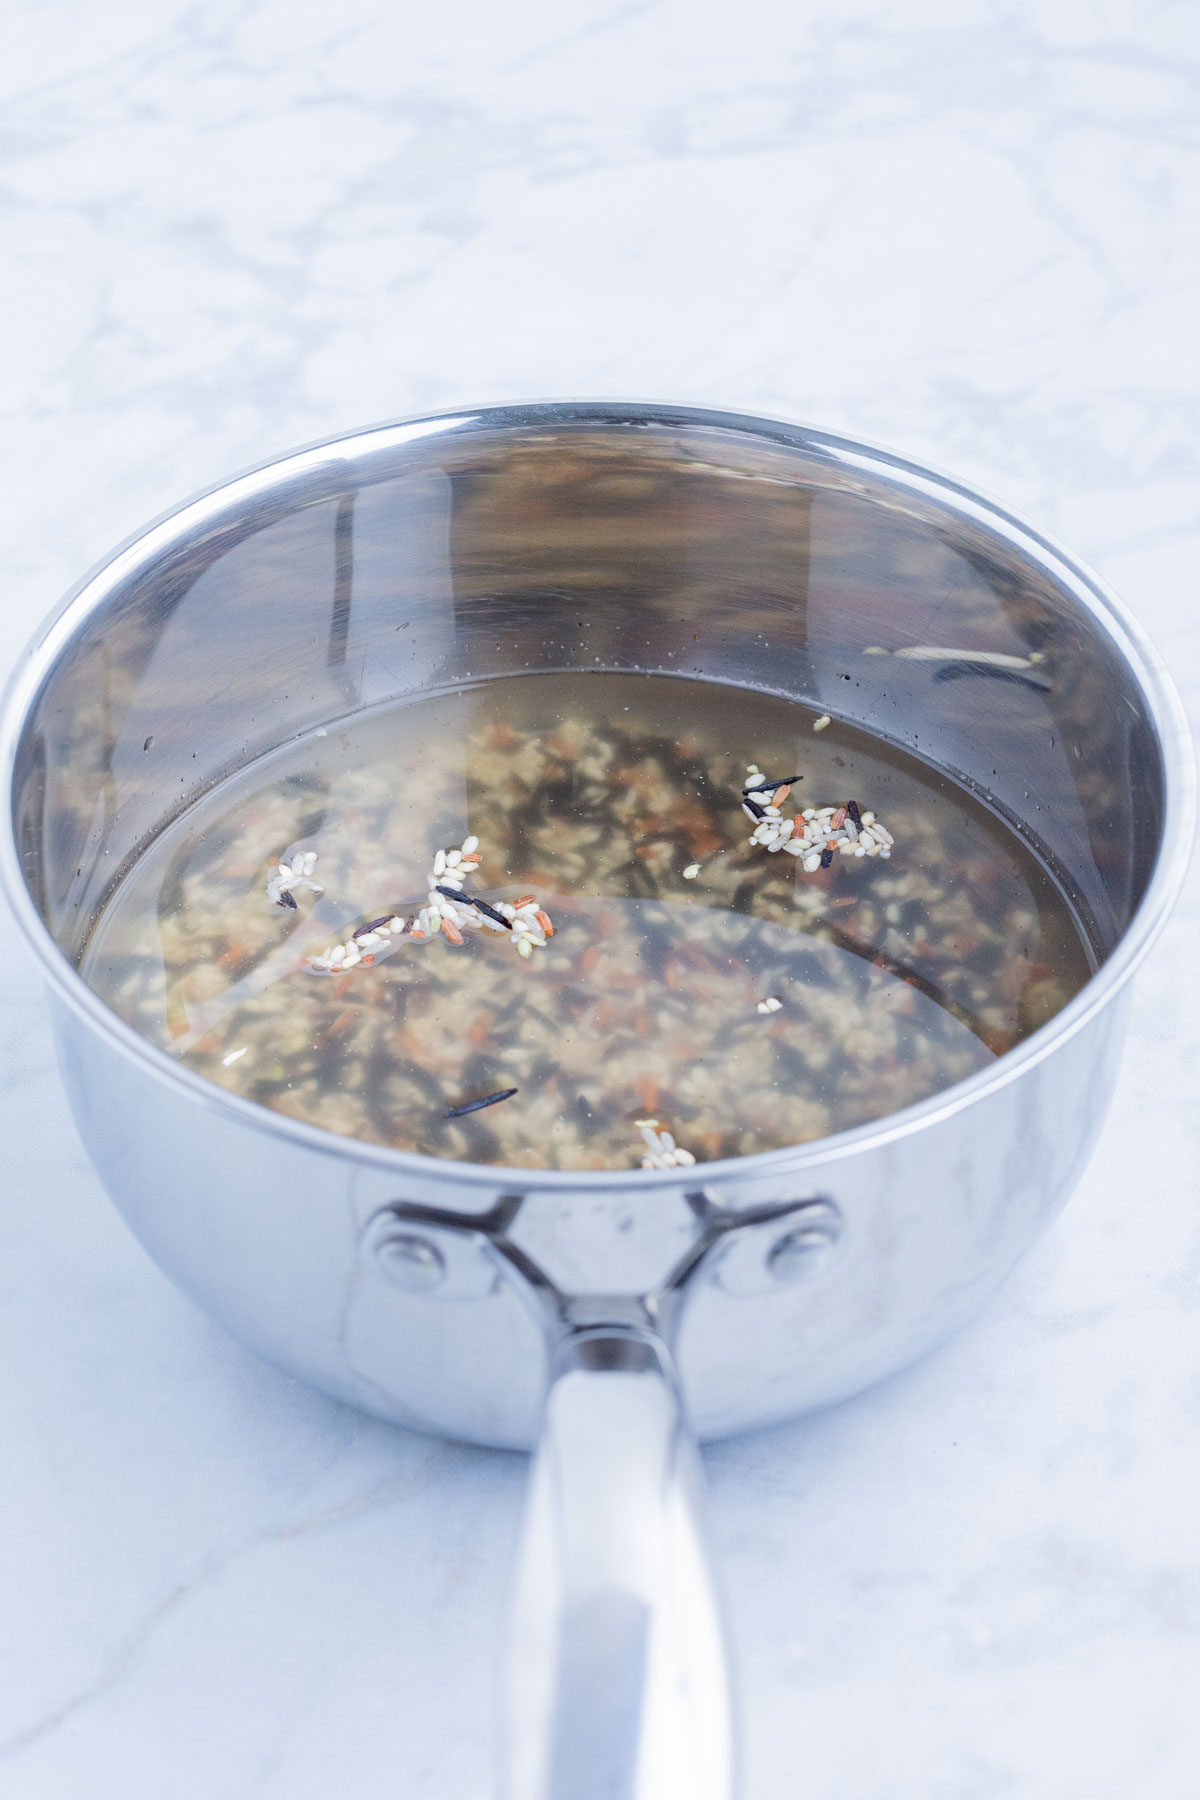 Wild rice is cooked in a pot on the stove.